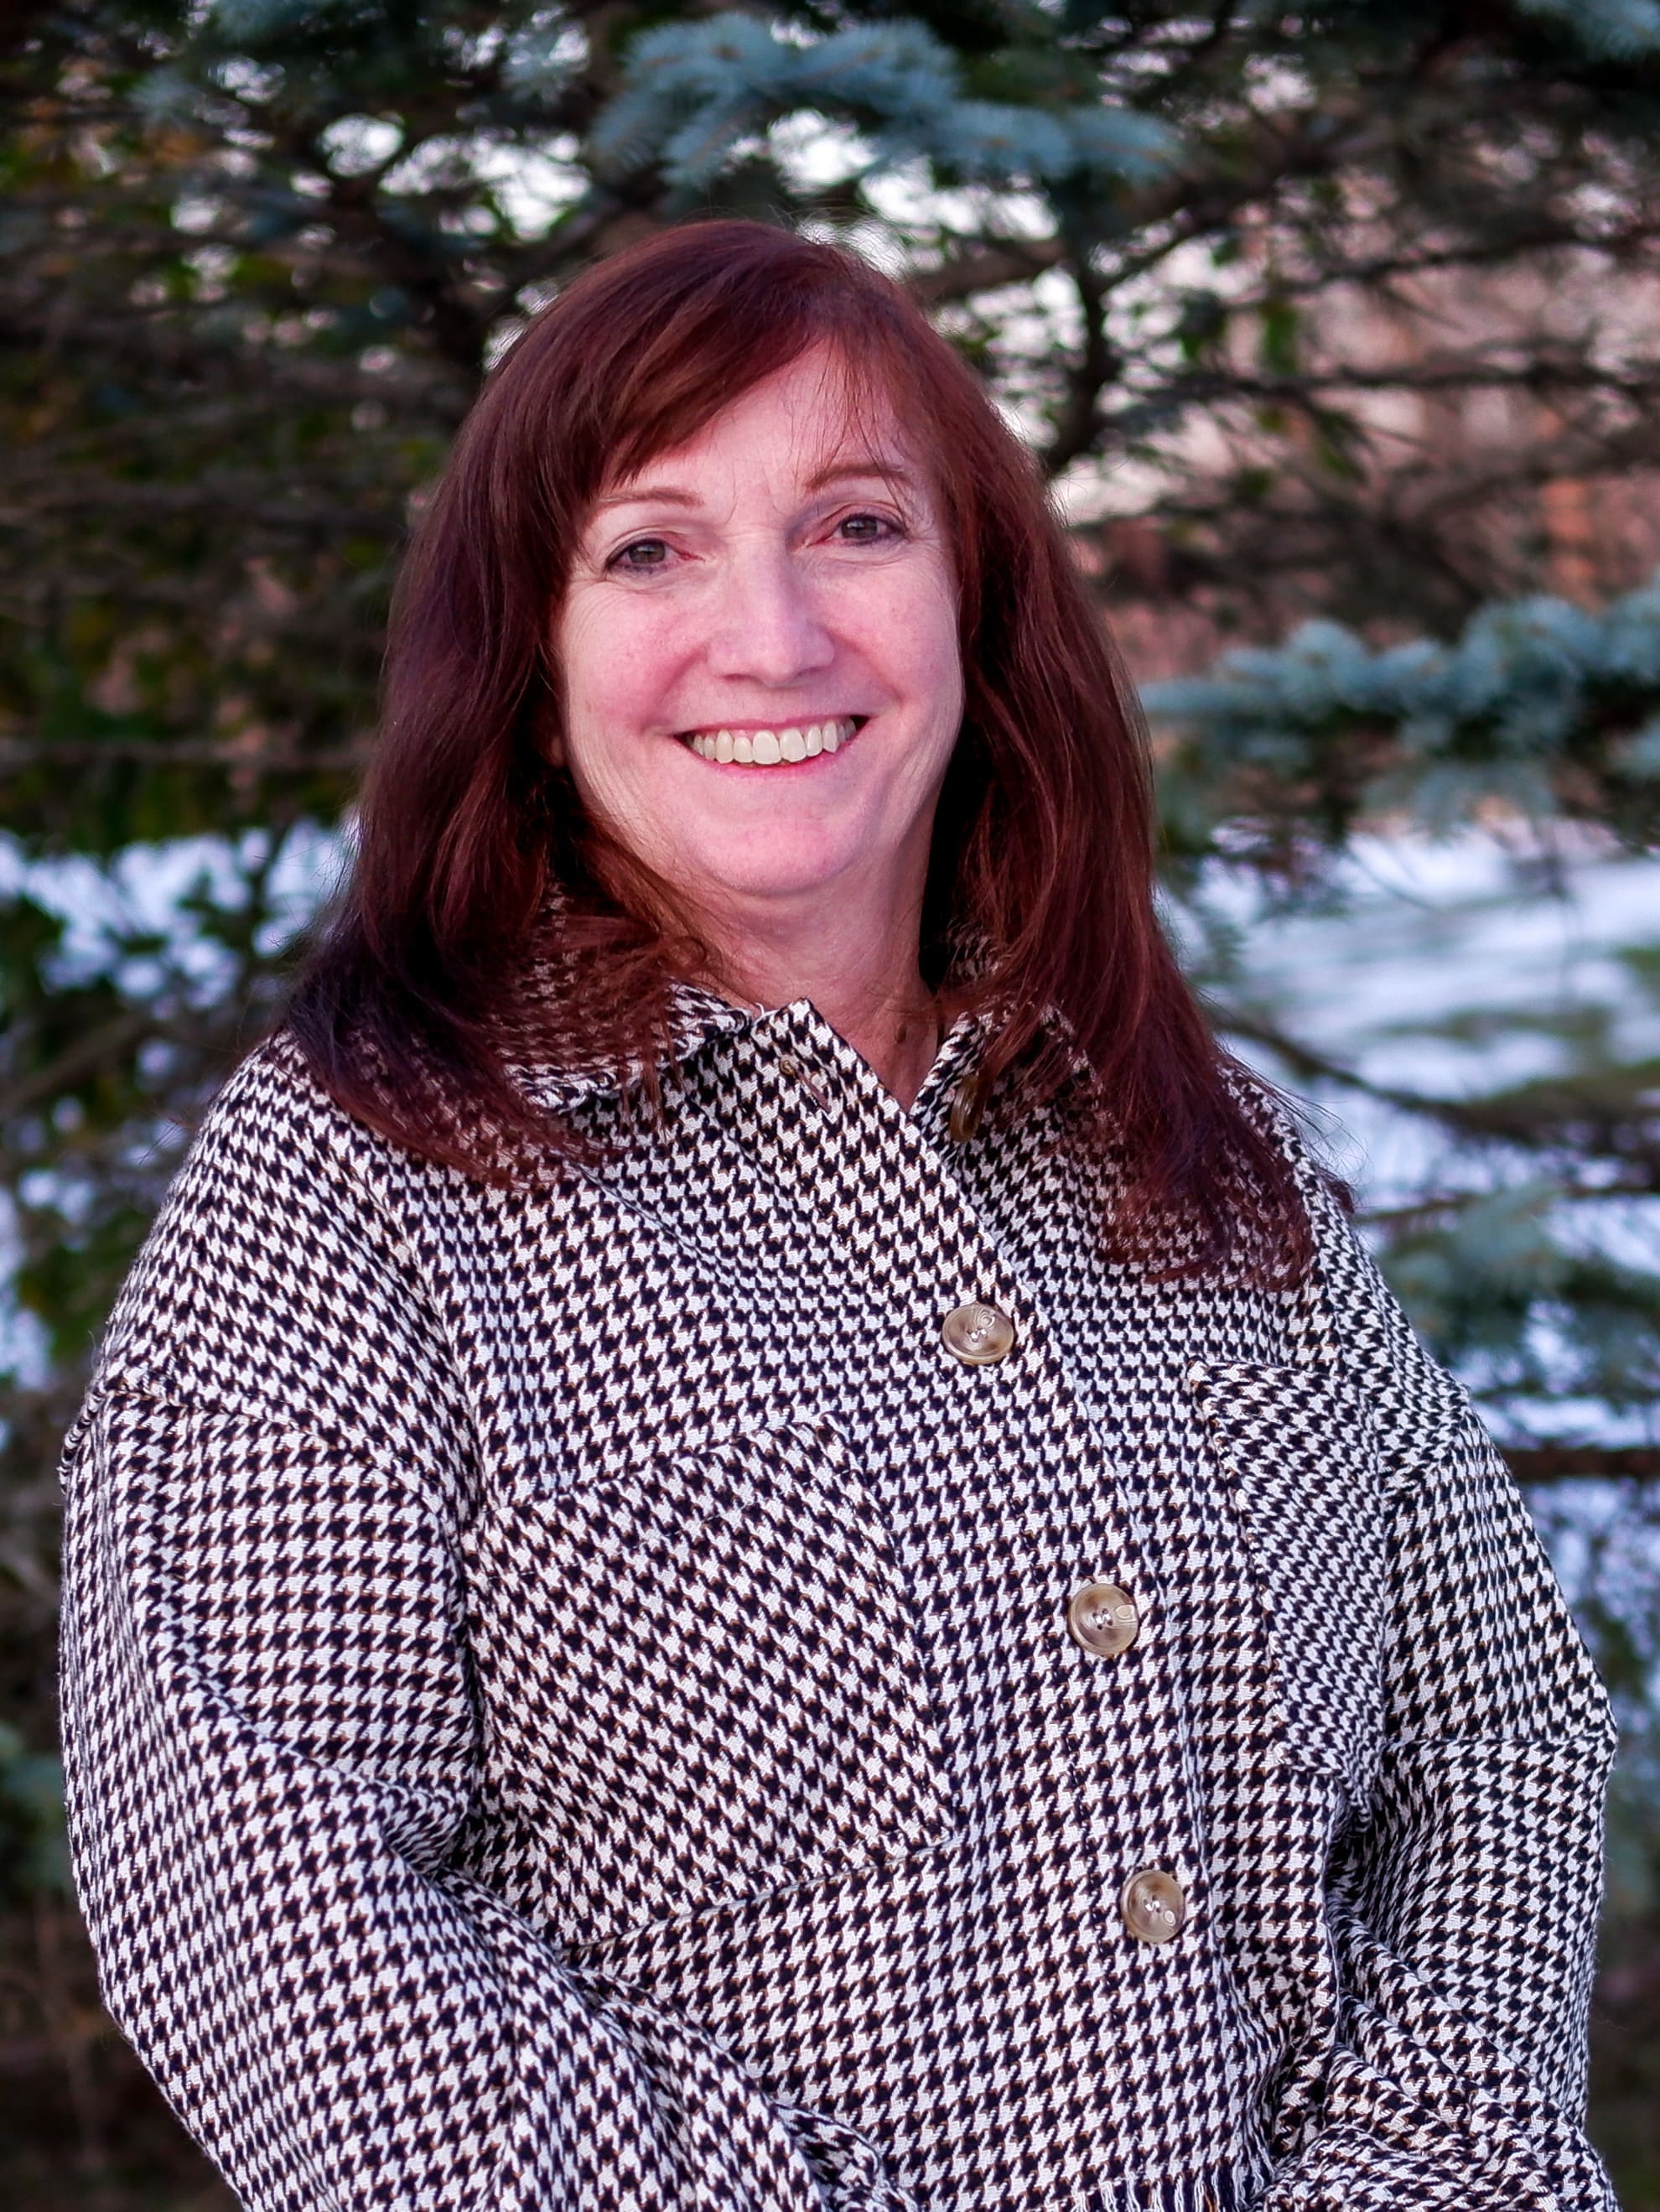 A woman in a plaid shirt smiling in front of trees at an addiction recovery center.